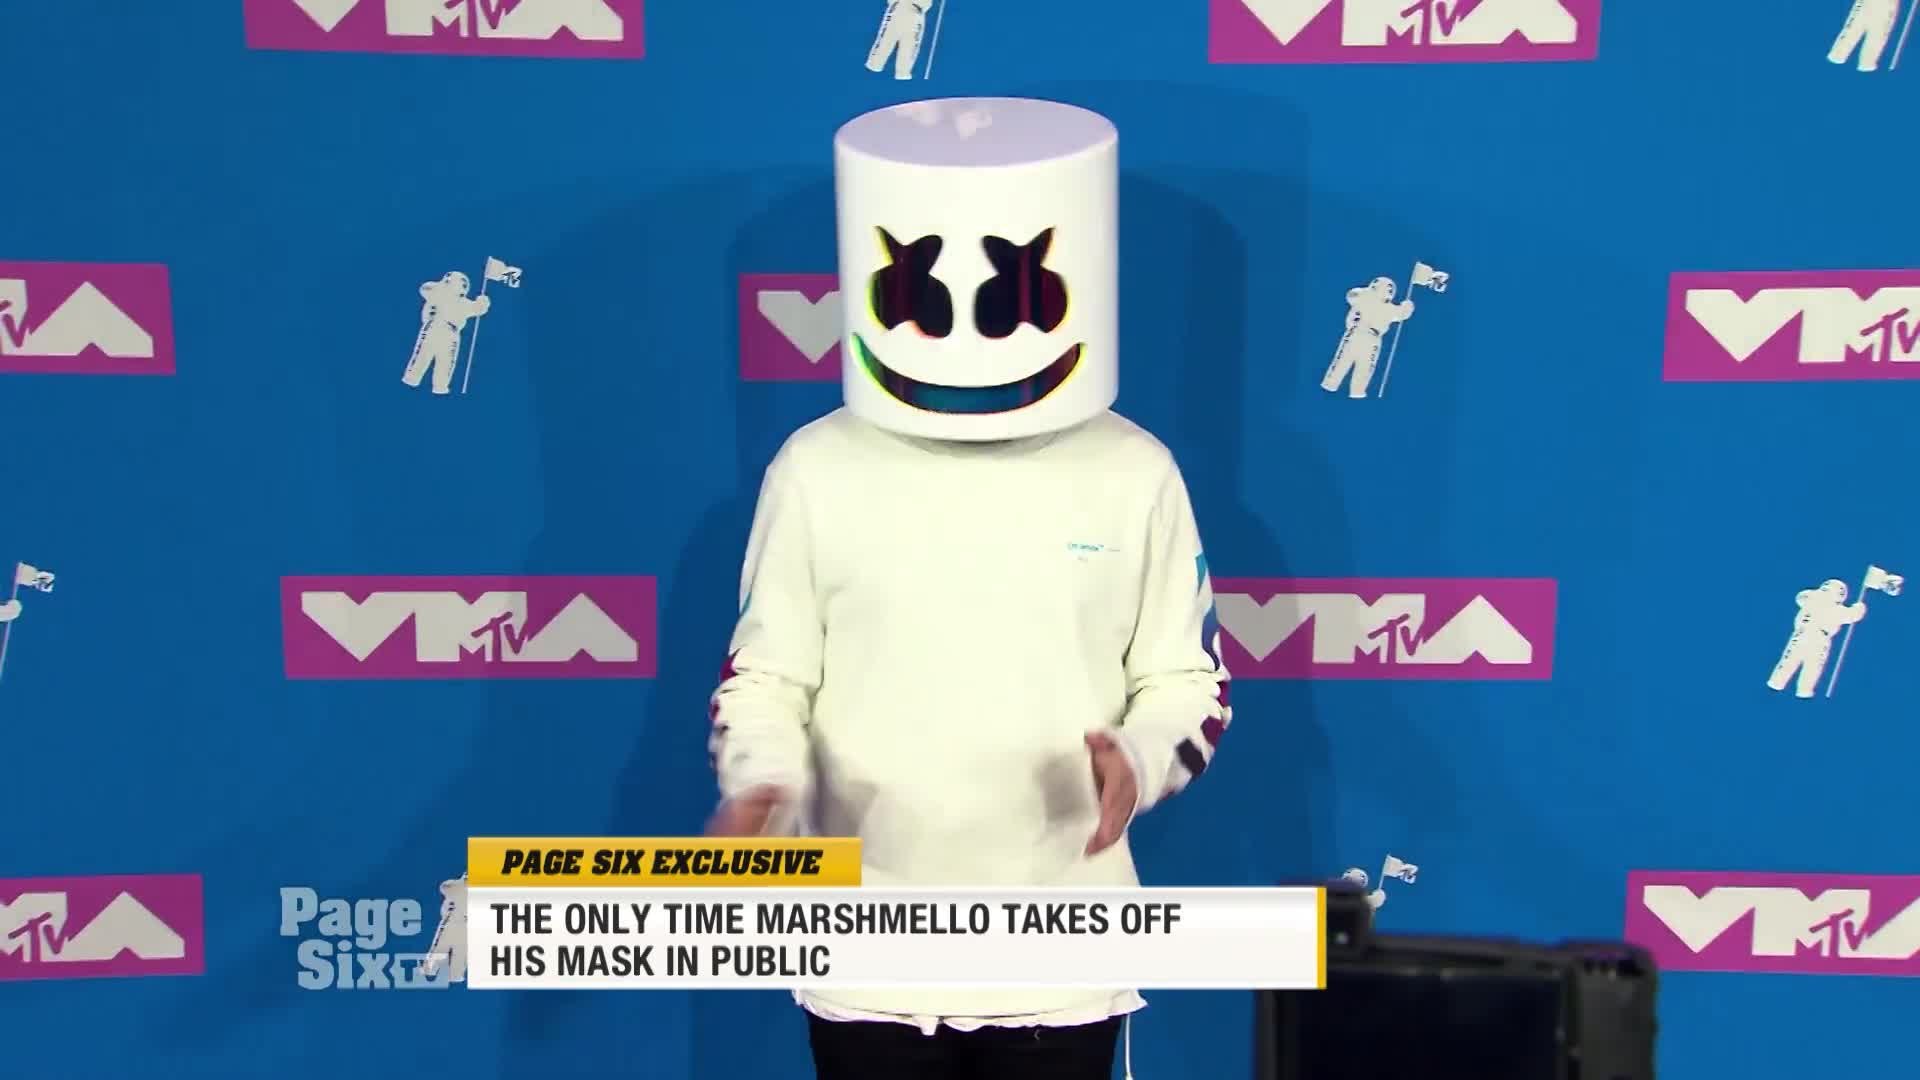 If You Want To See Marshmellomusic With His Mask Off You Better